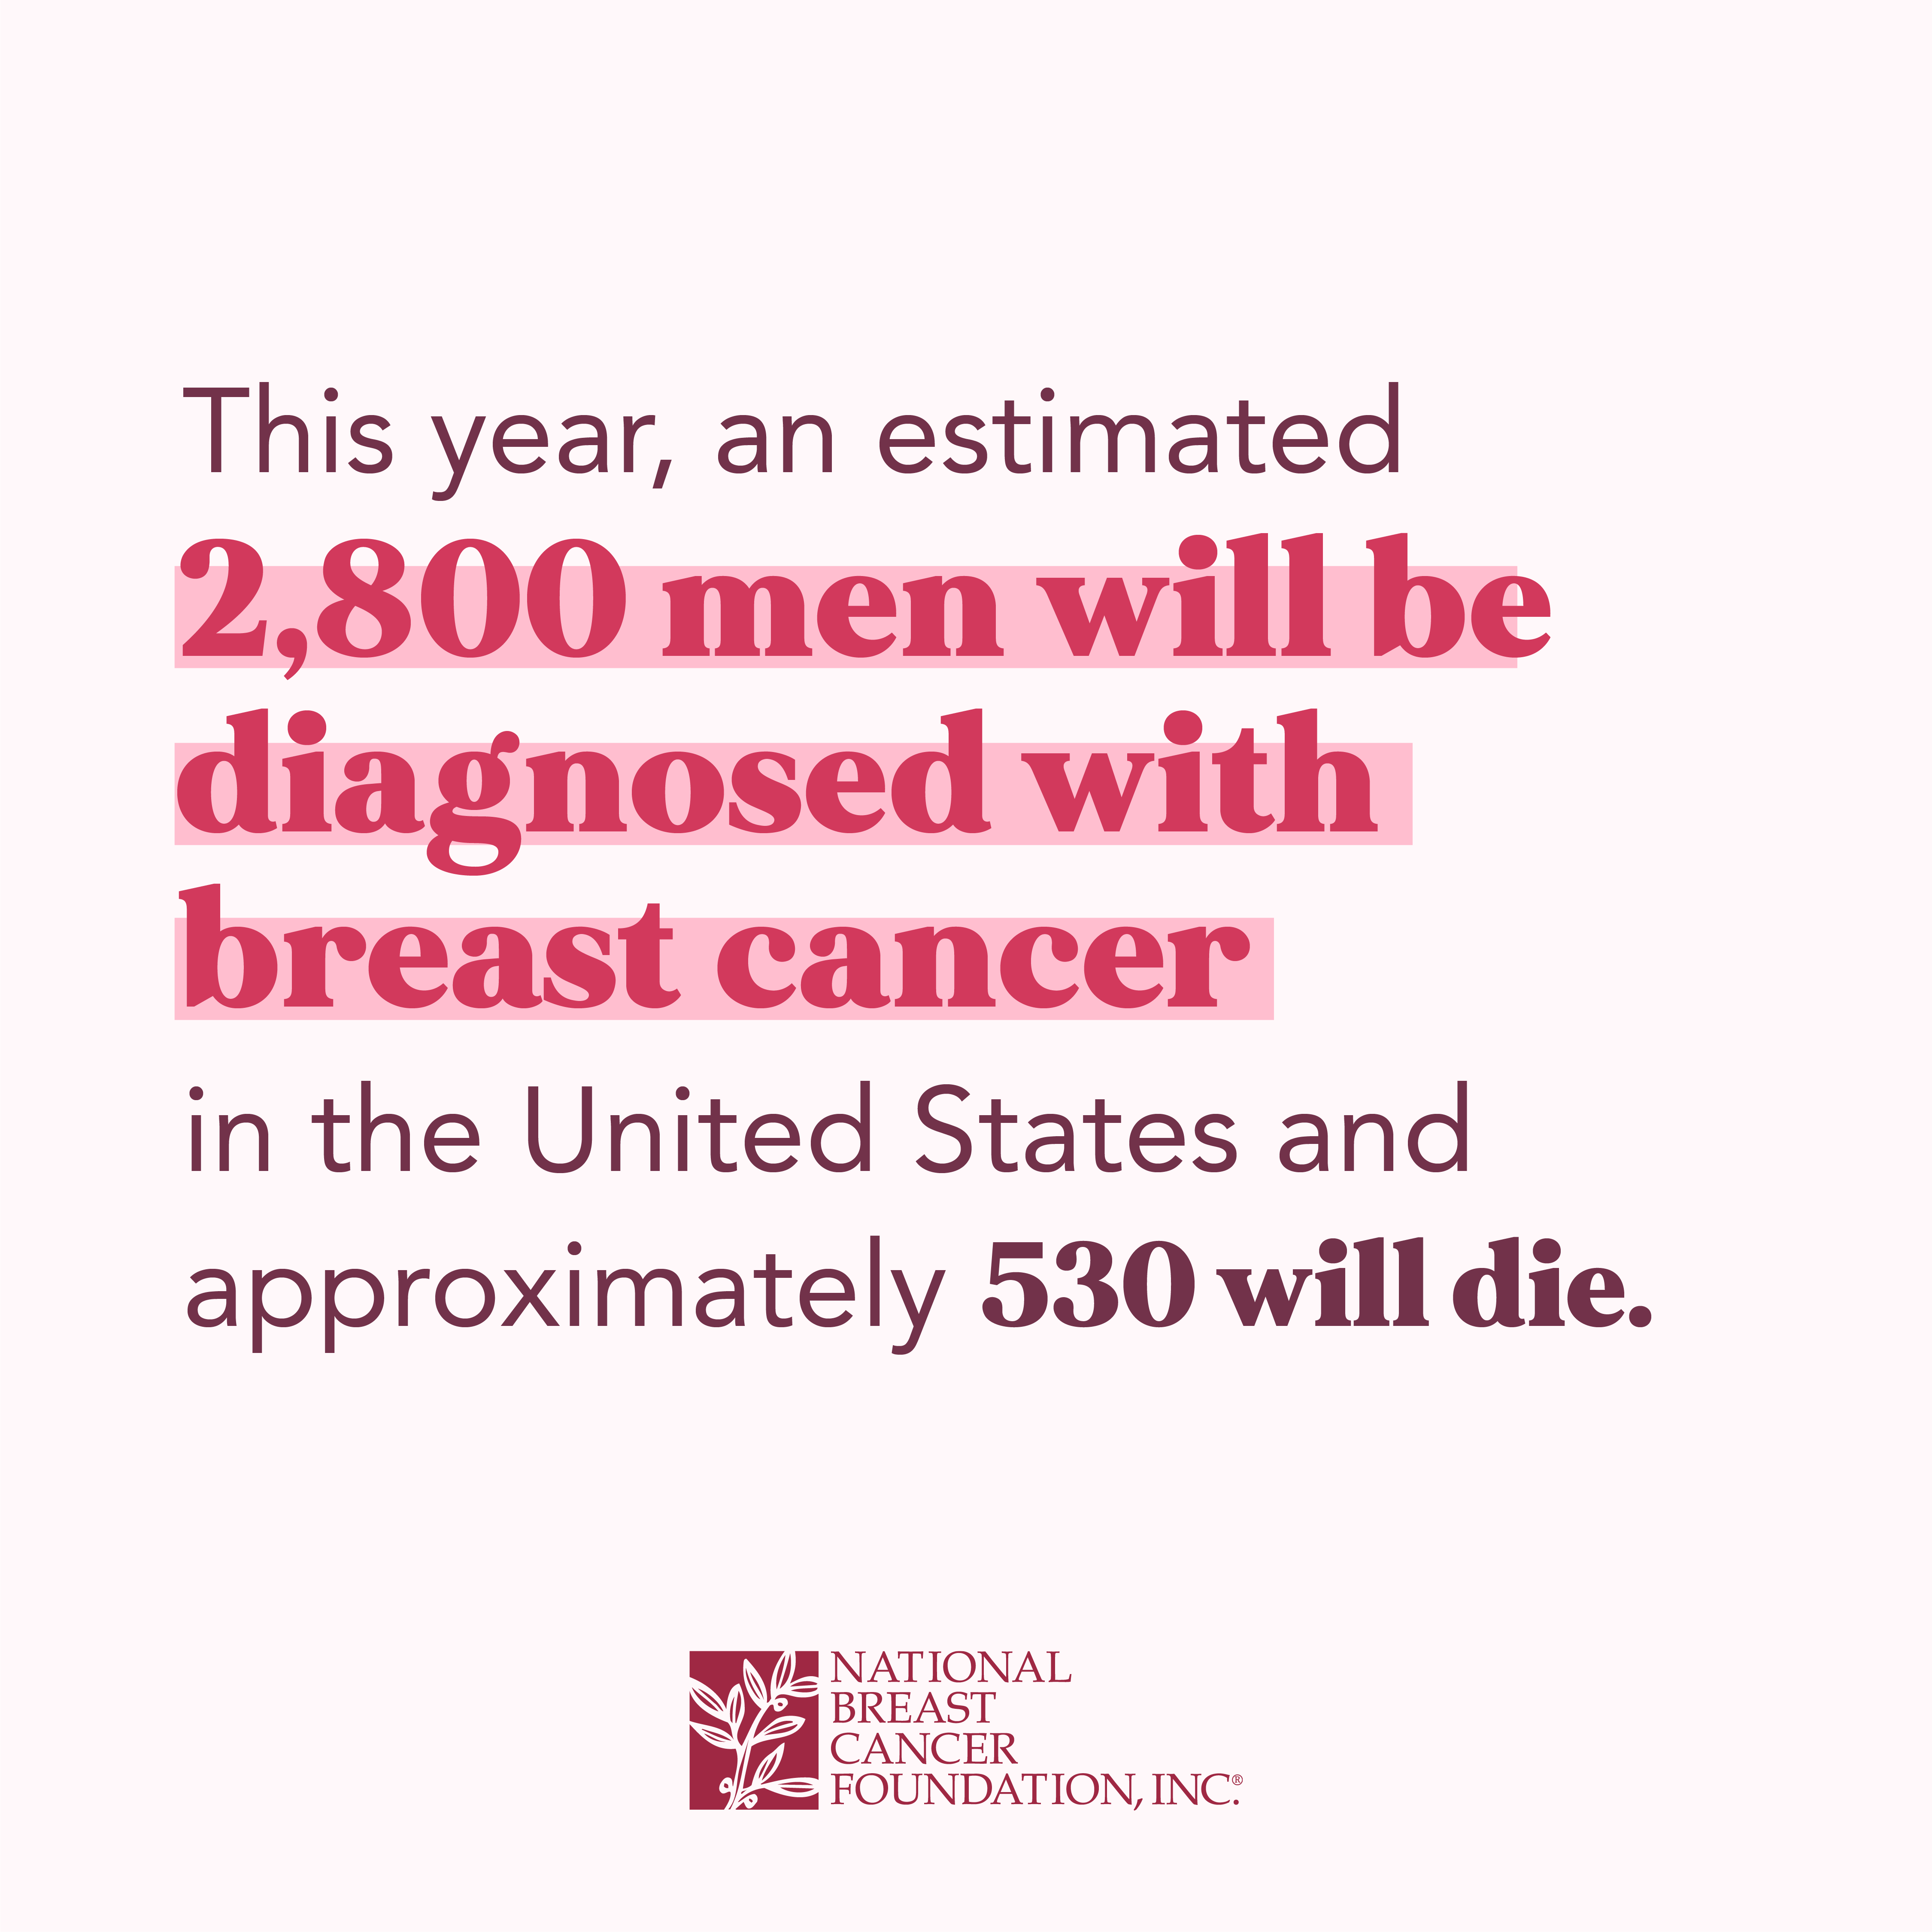 About 2,800 men will be diagnosed with breast cancer in the United States, approximately 530 will die